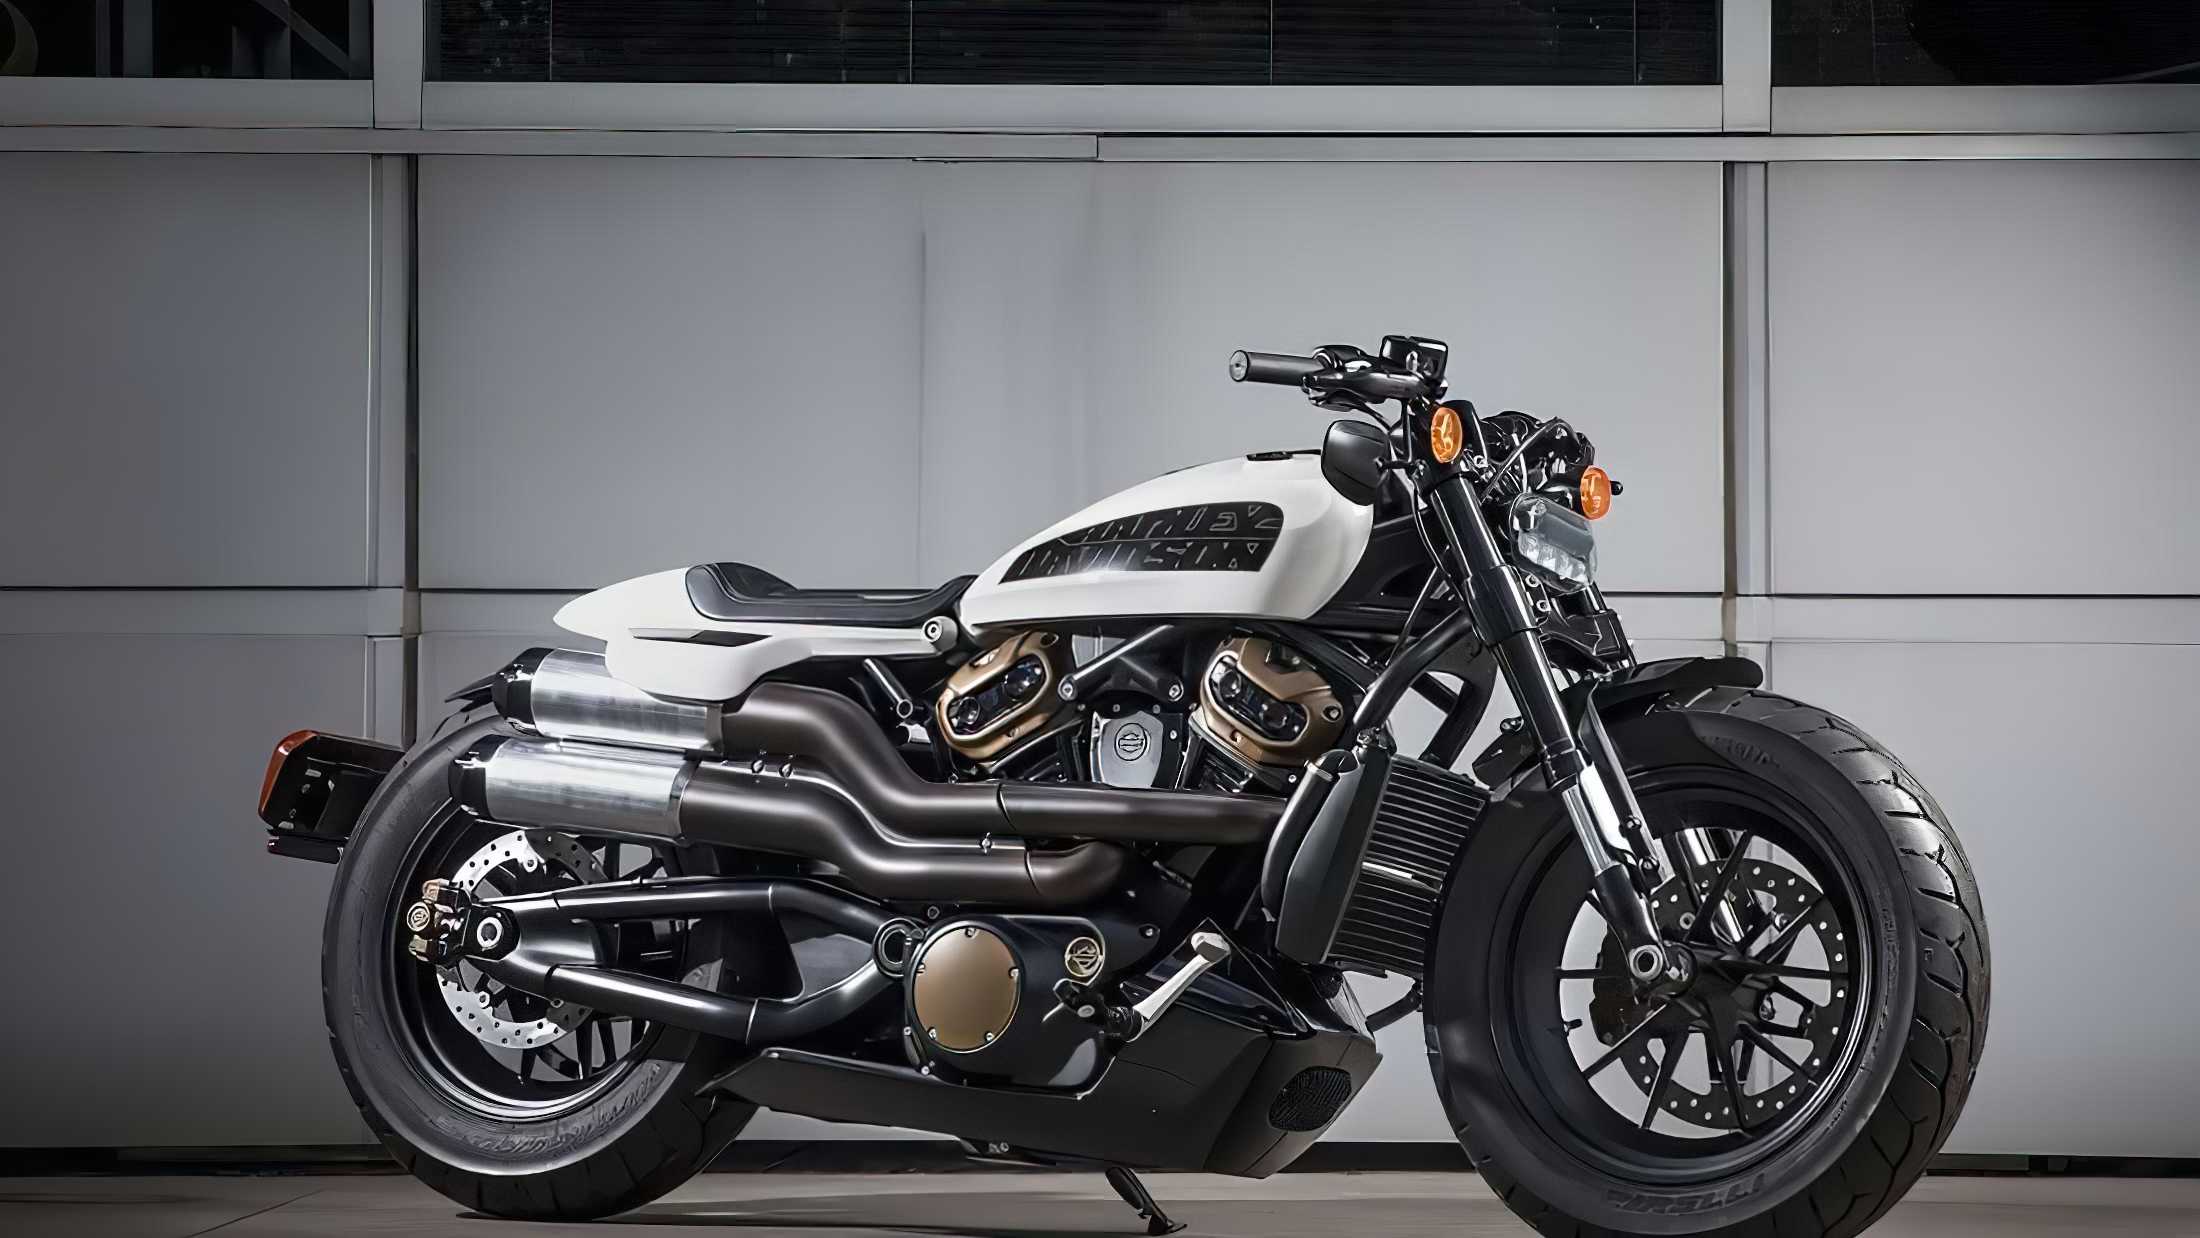 Harley-Davidson might have two all-new bikes coming, leaked